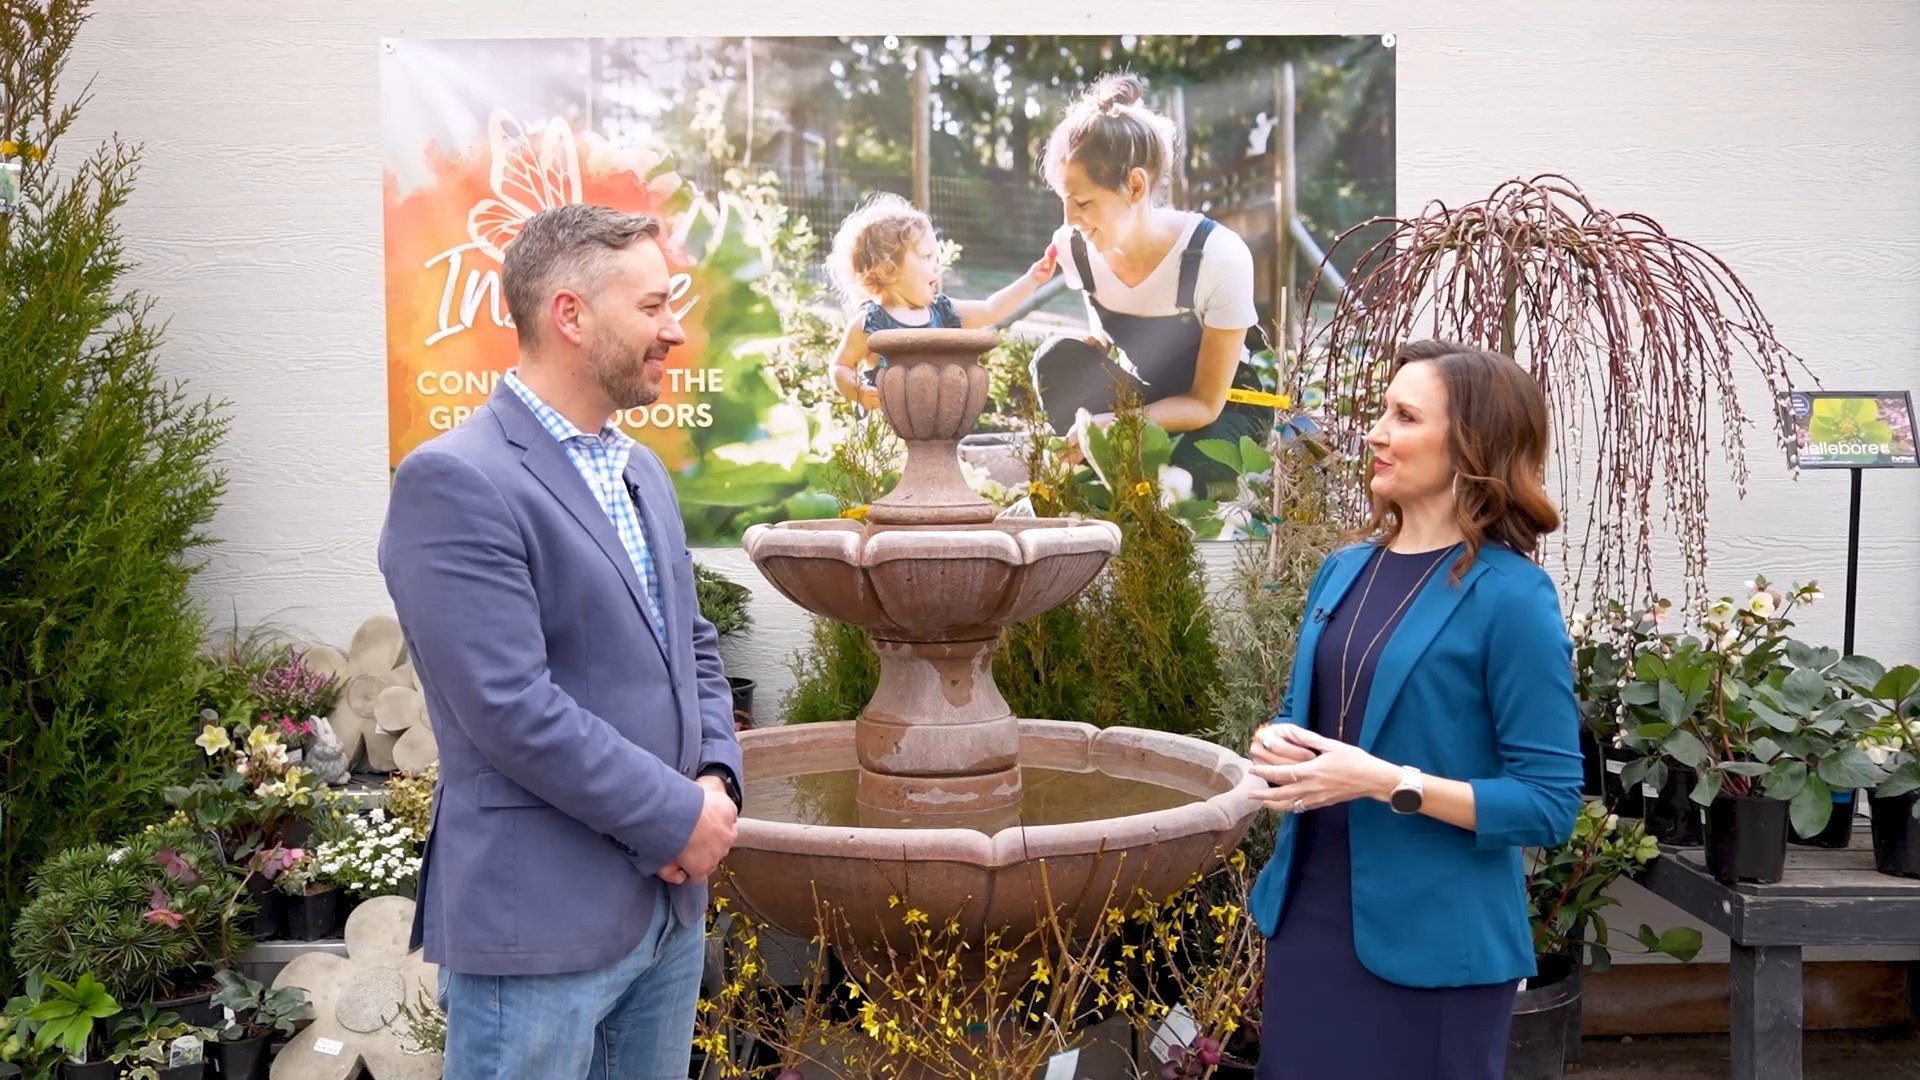 Idaho Today went to Farwest Garden Center to talk with Nick Aldinger, the producer of the Boise Flower and Garden Show, what to expect from the massive garden show.